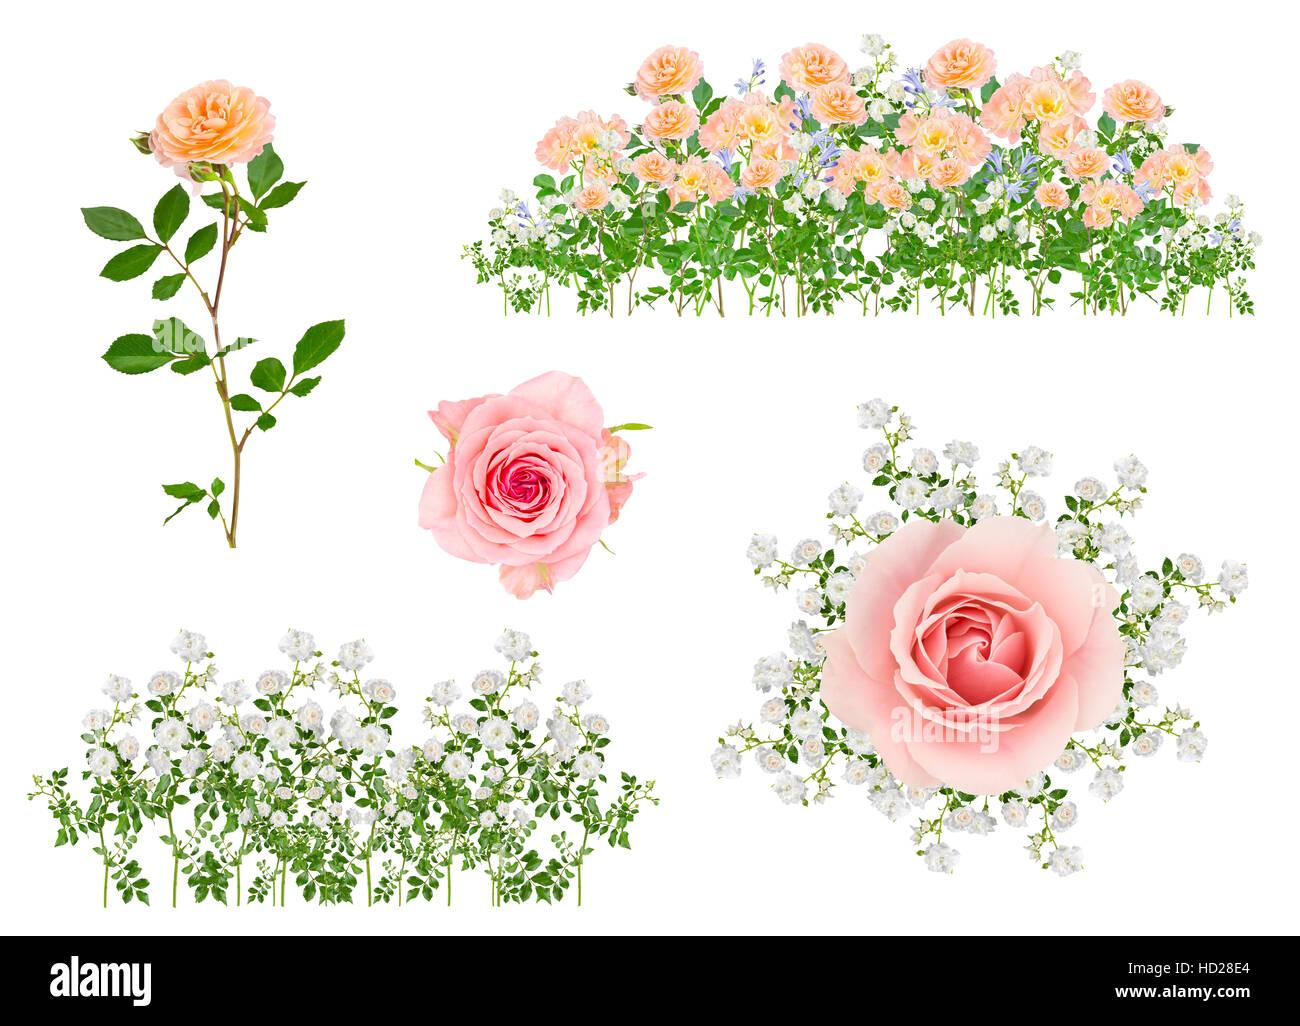 Collage of isolated rose flower arrangements on white background with no shadows. Stock Photo